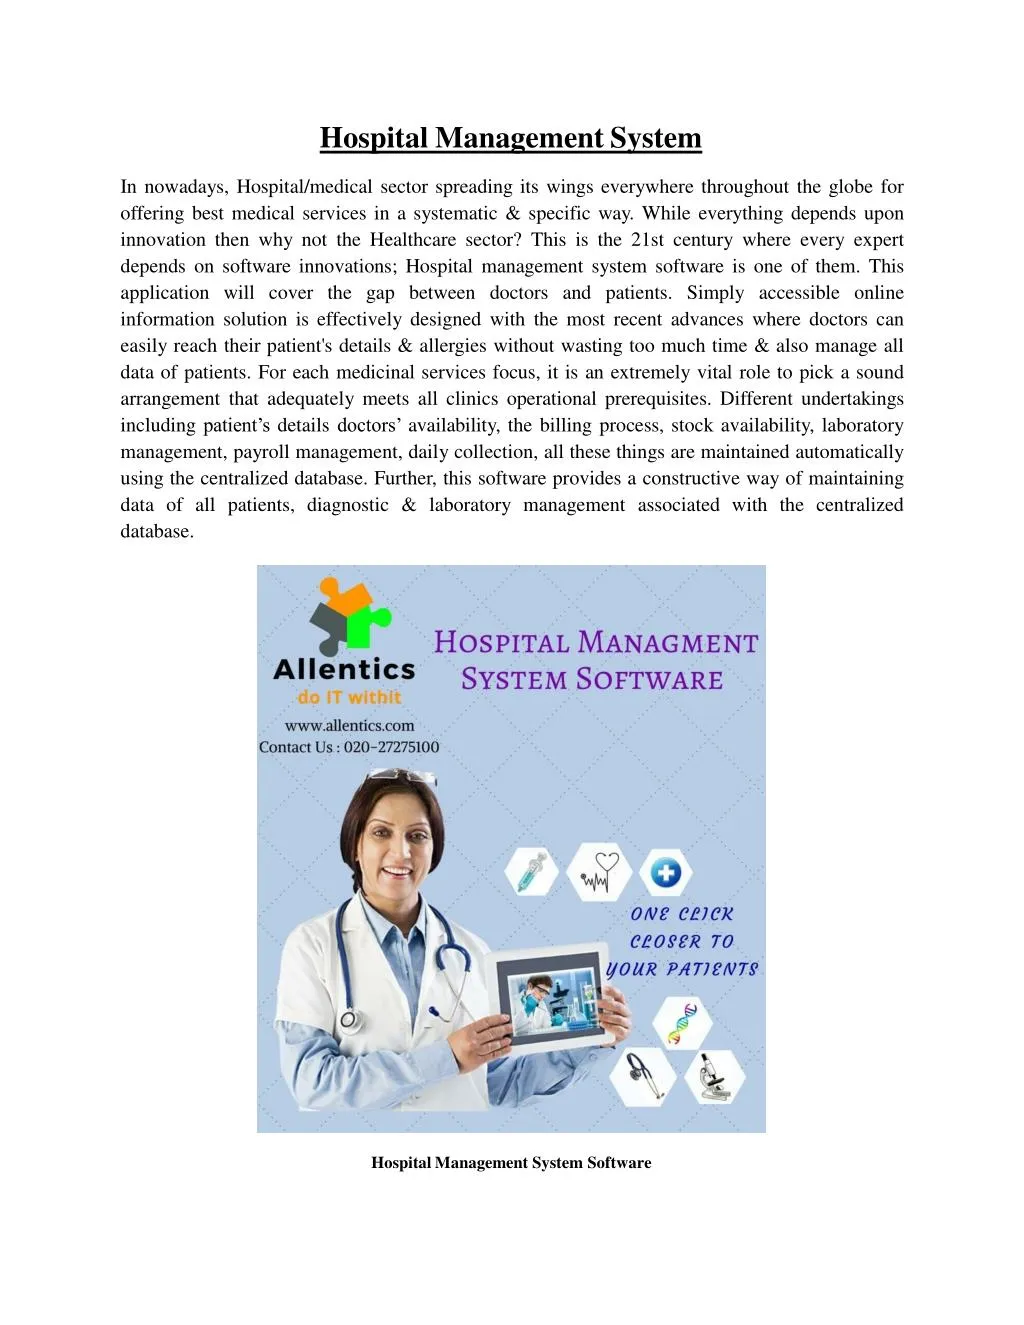 hospital management system in nowadays hospital